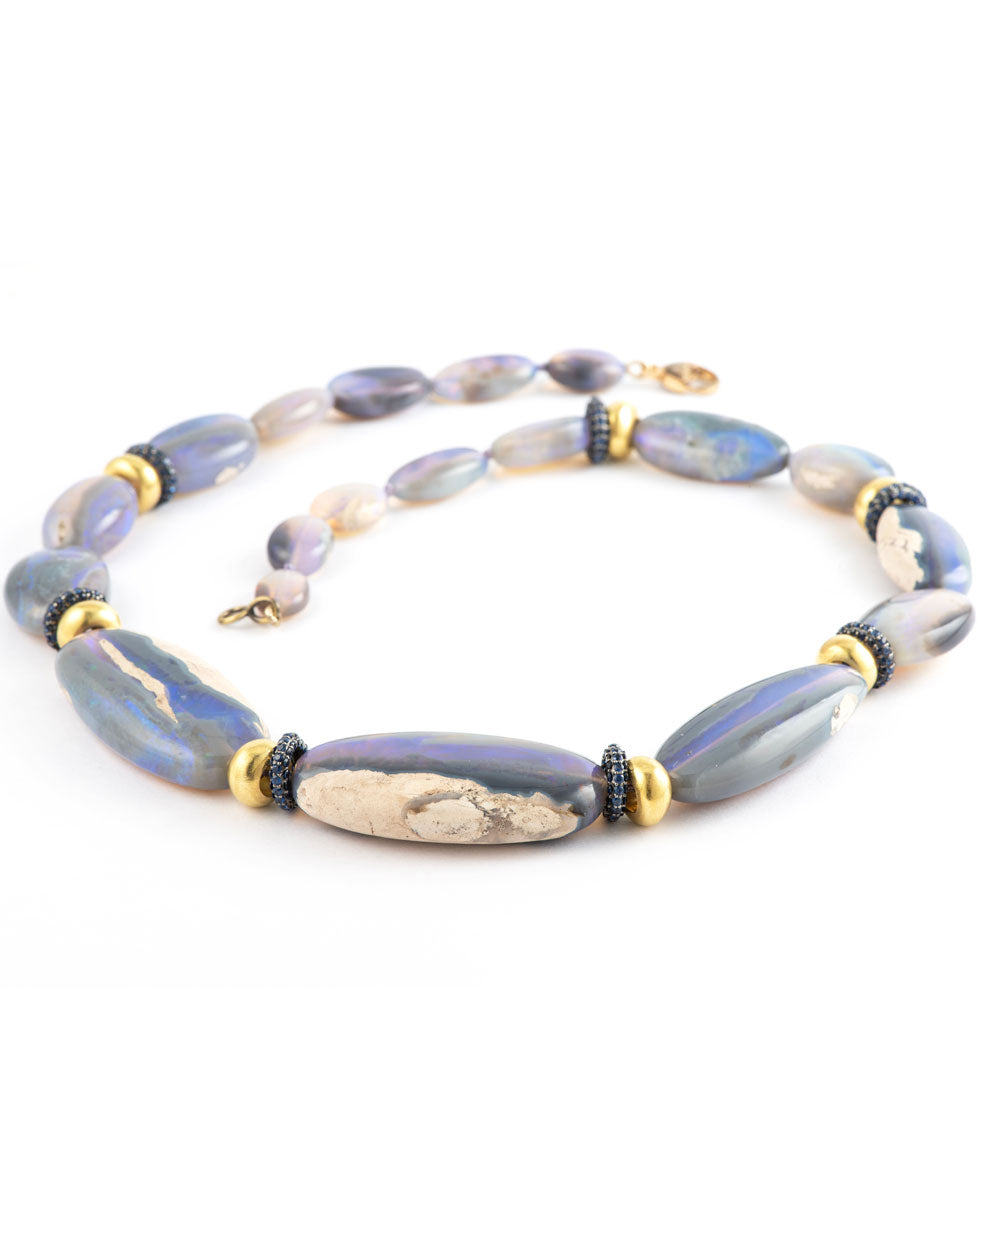 Opal and Sapphire Rondell Necklace